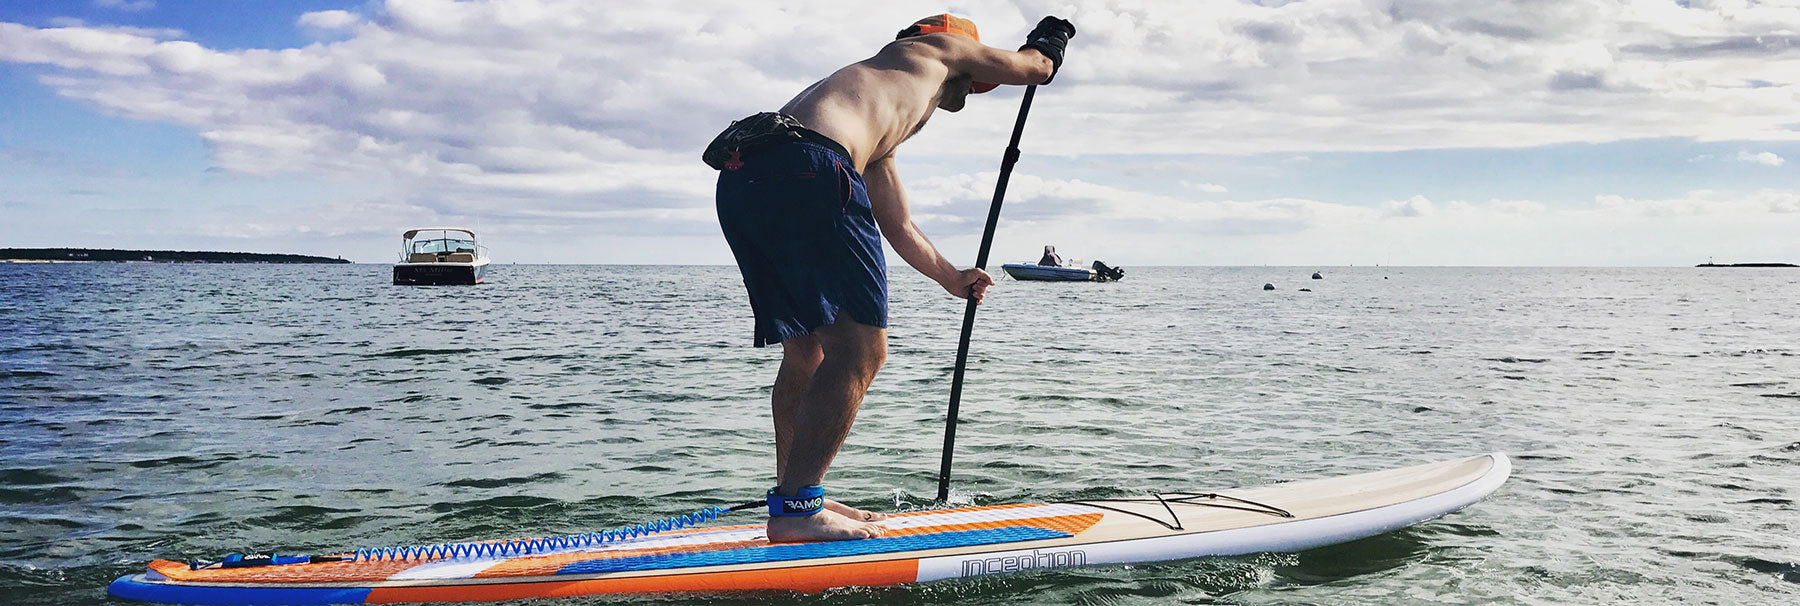 This Summer's Coolest Paddle Board - The ECS Inception